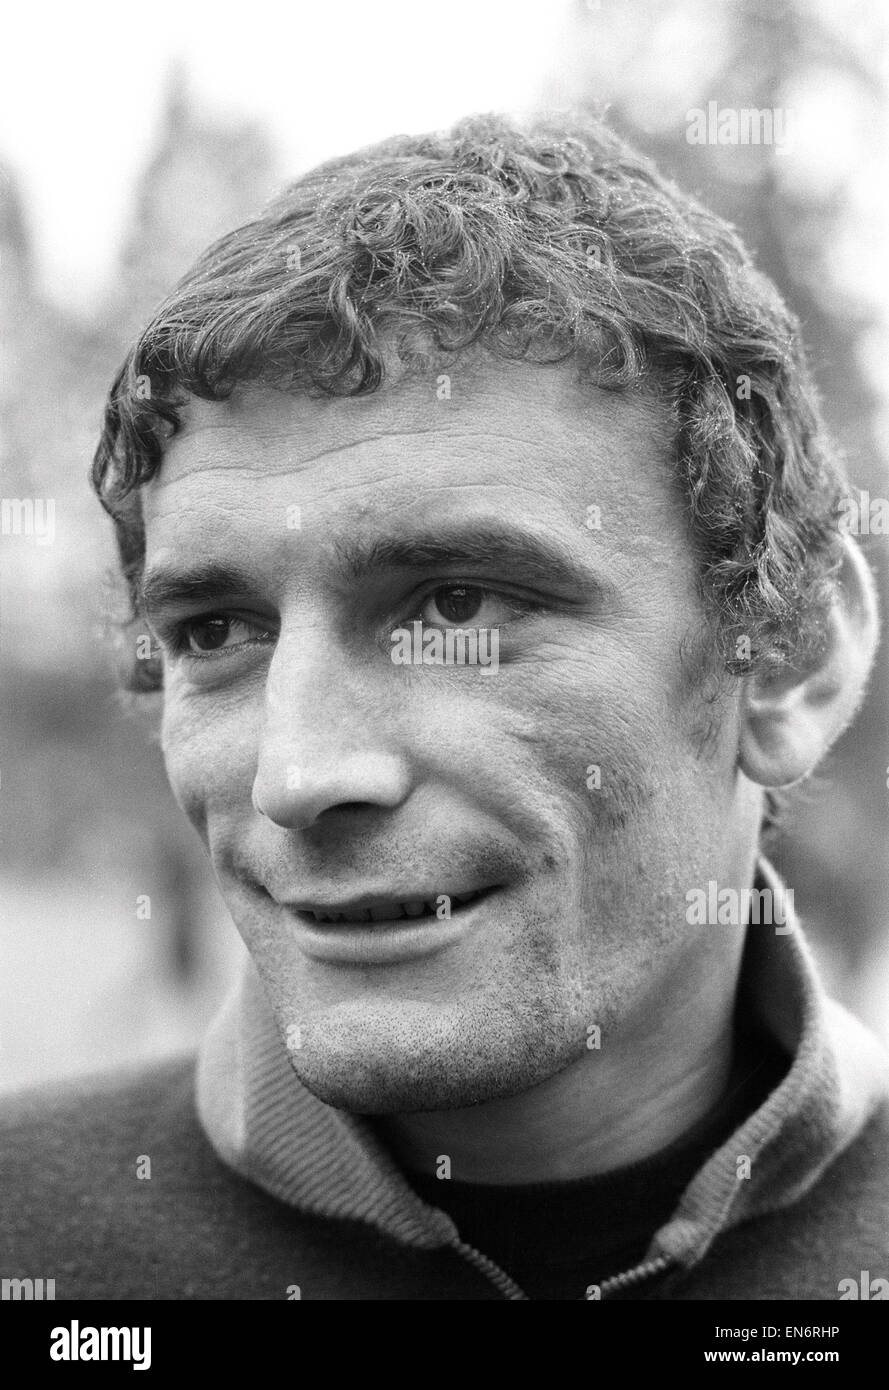 Italian striker Luigi Riva who plays for Sardinian club side Cagliari, pictured during a training session at the Selsdon Park Hotel in Surrey, ahead of his team's match against Crystal Palace in the Anglo-Italian tournament. 25th May 1971. Stock Photo